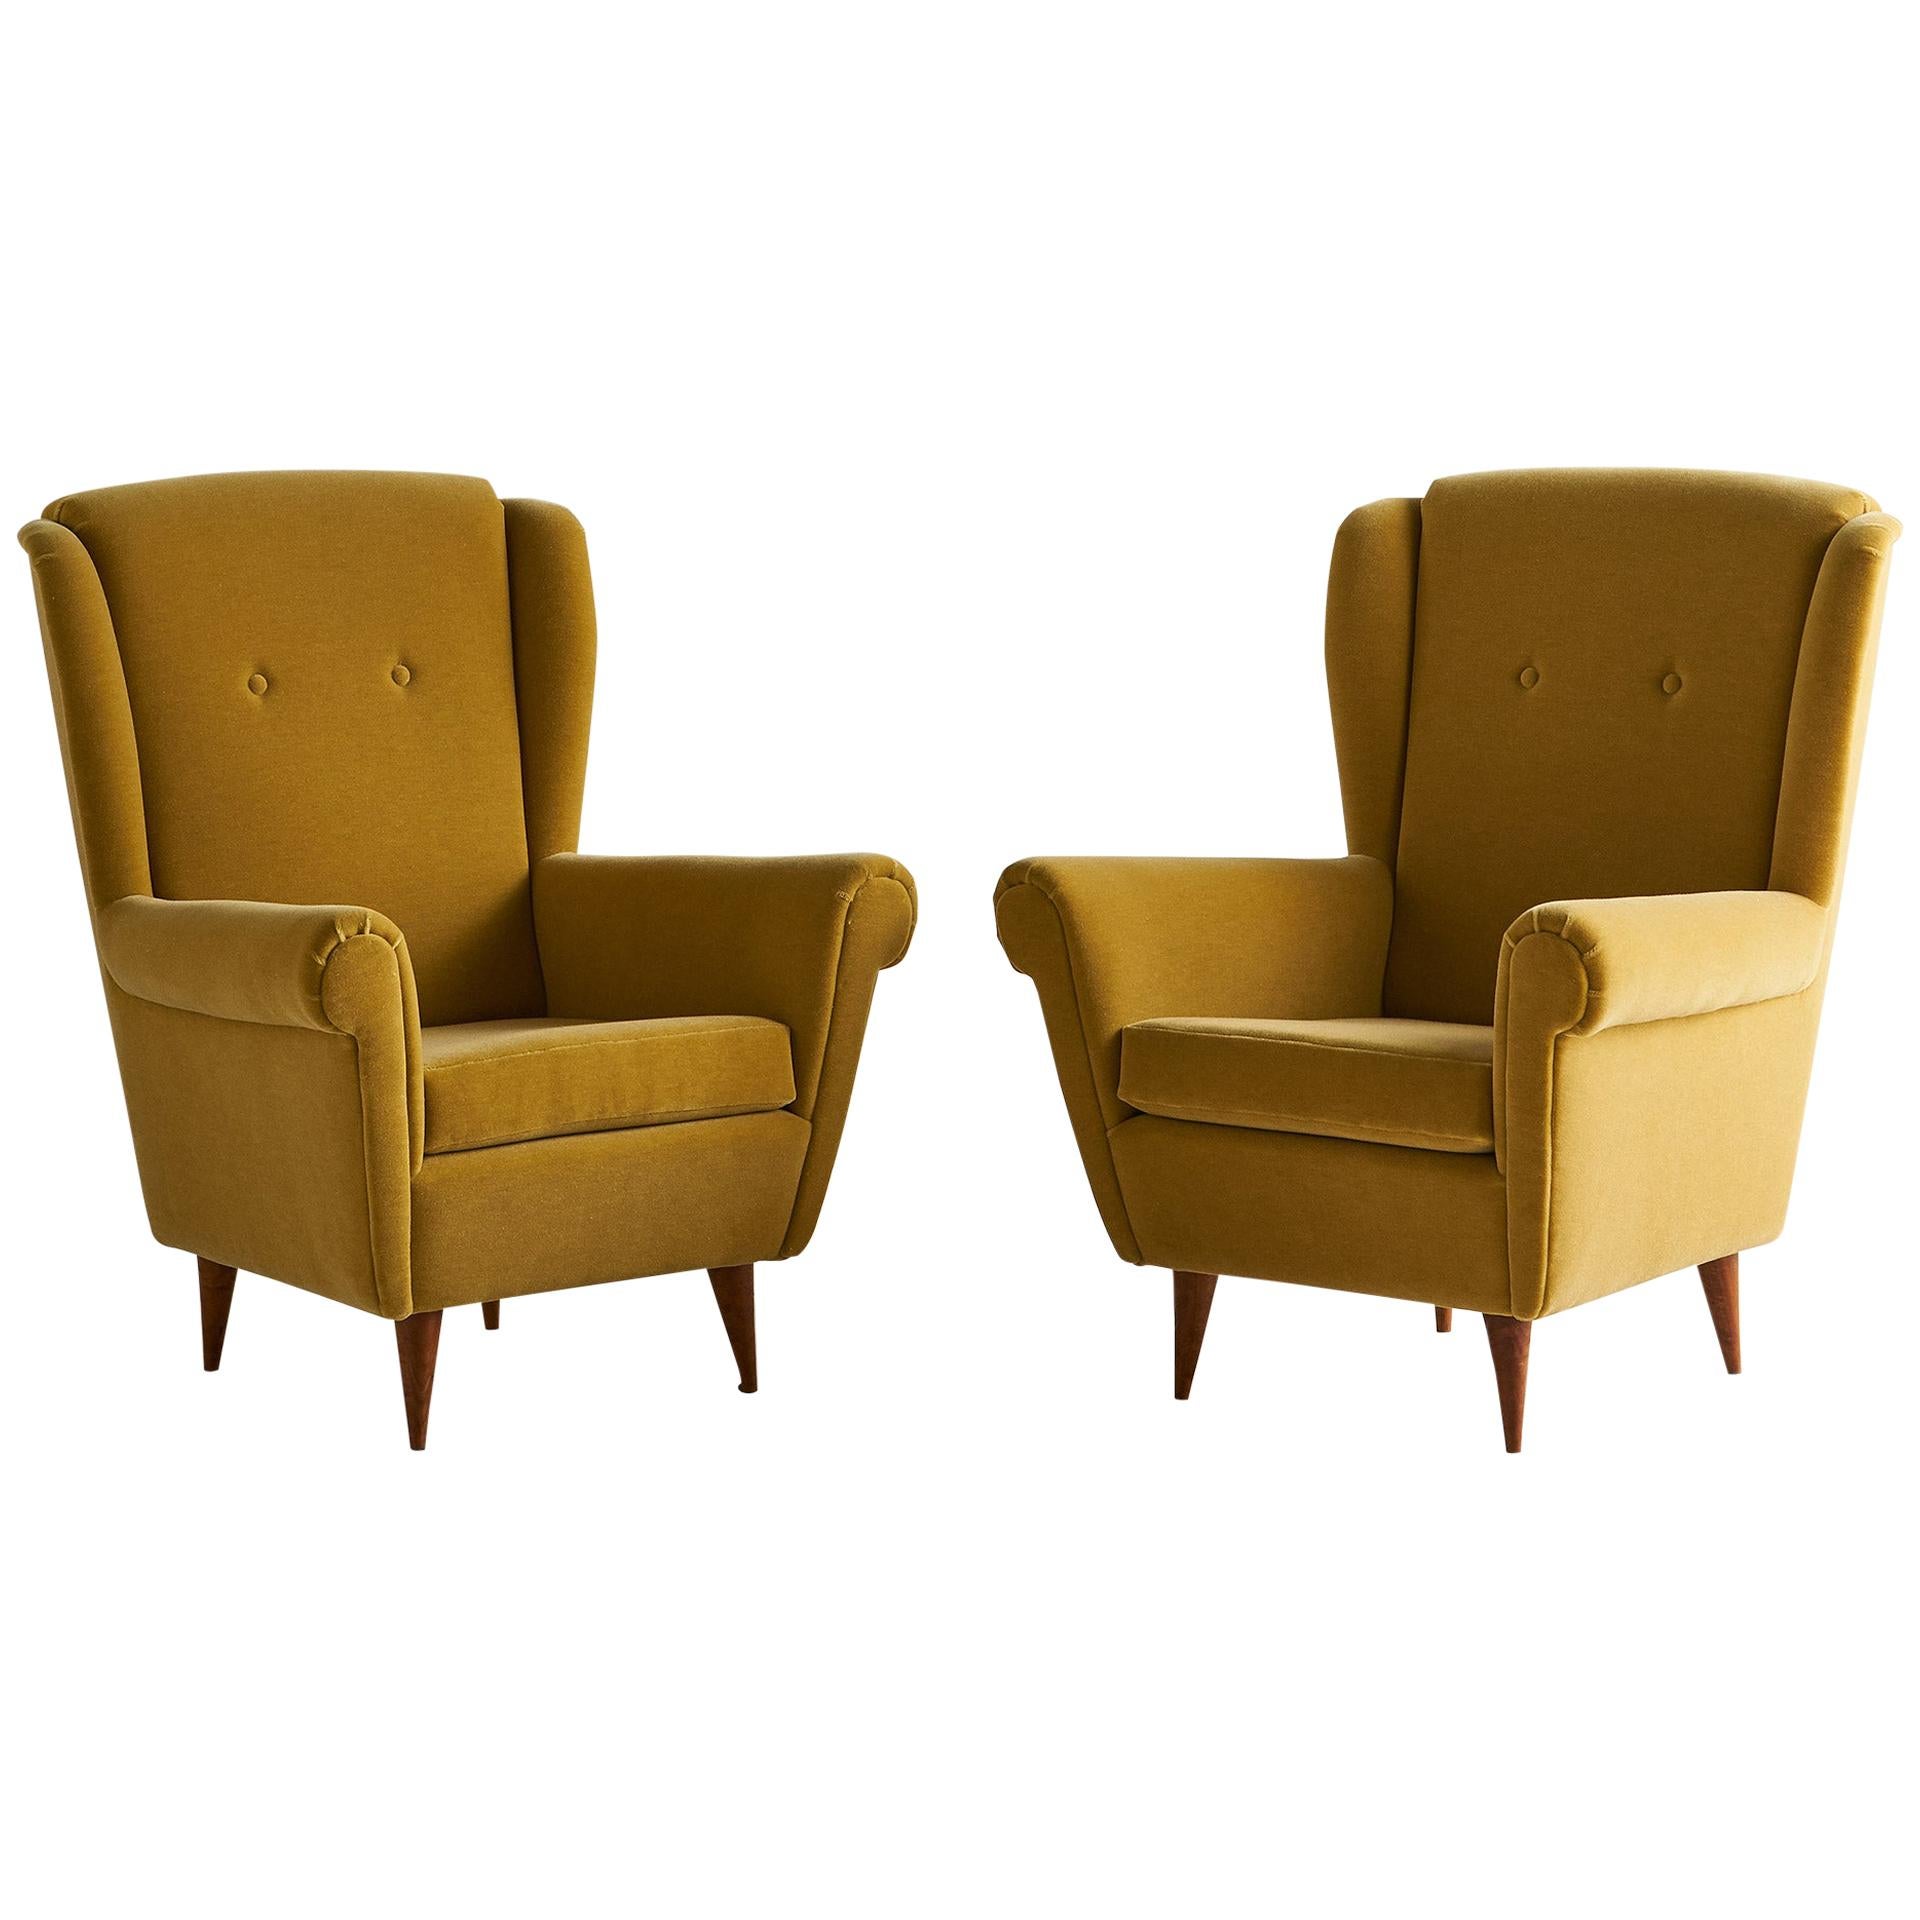 Pair of Vintage Italian Wingback Chairs in Mustard Yellow Mohair